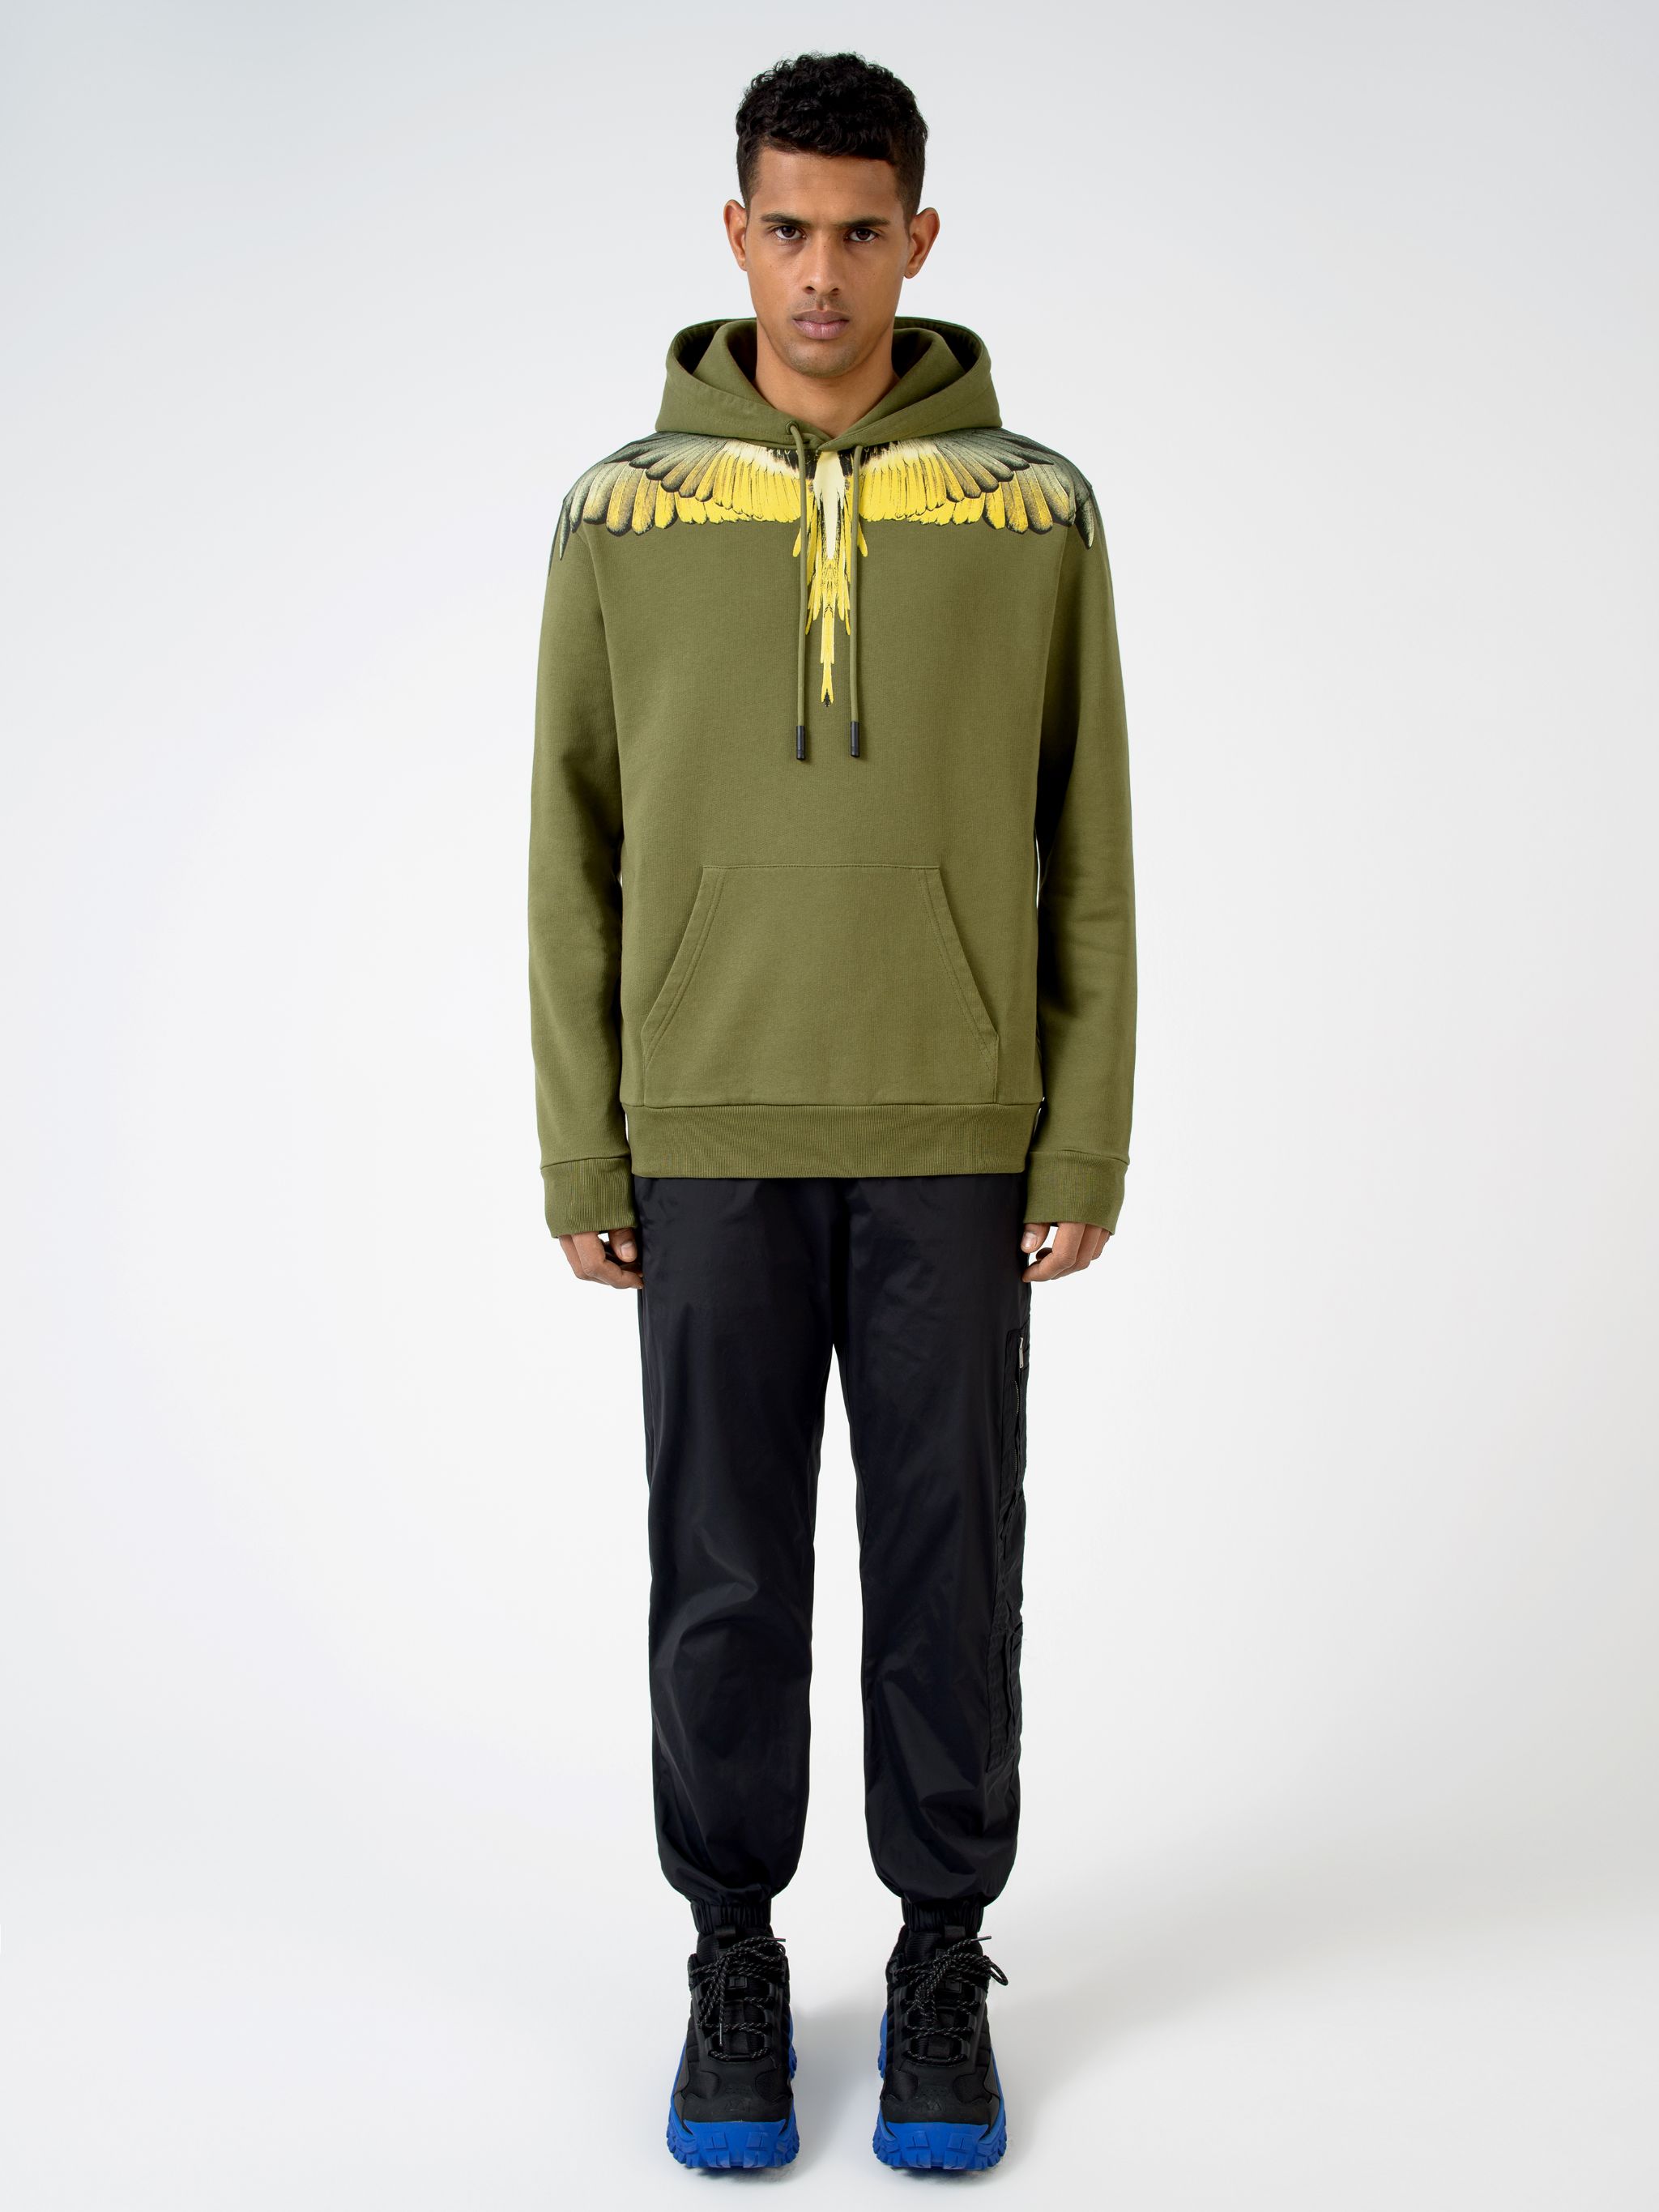 Army green/yellow cotton winged shoulder hoodie from Marcelo Burlon County of Milan featuring drawstring hood, feather print, front pouch pocket, long sleeves and ribbed detailing.